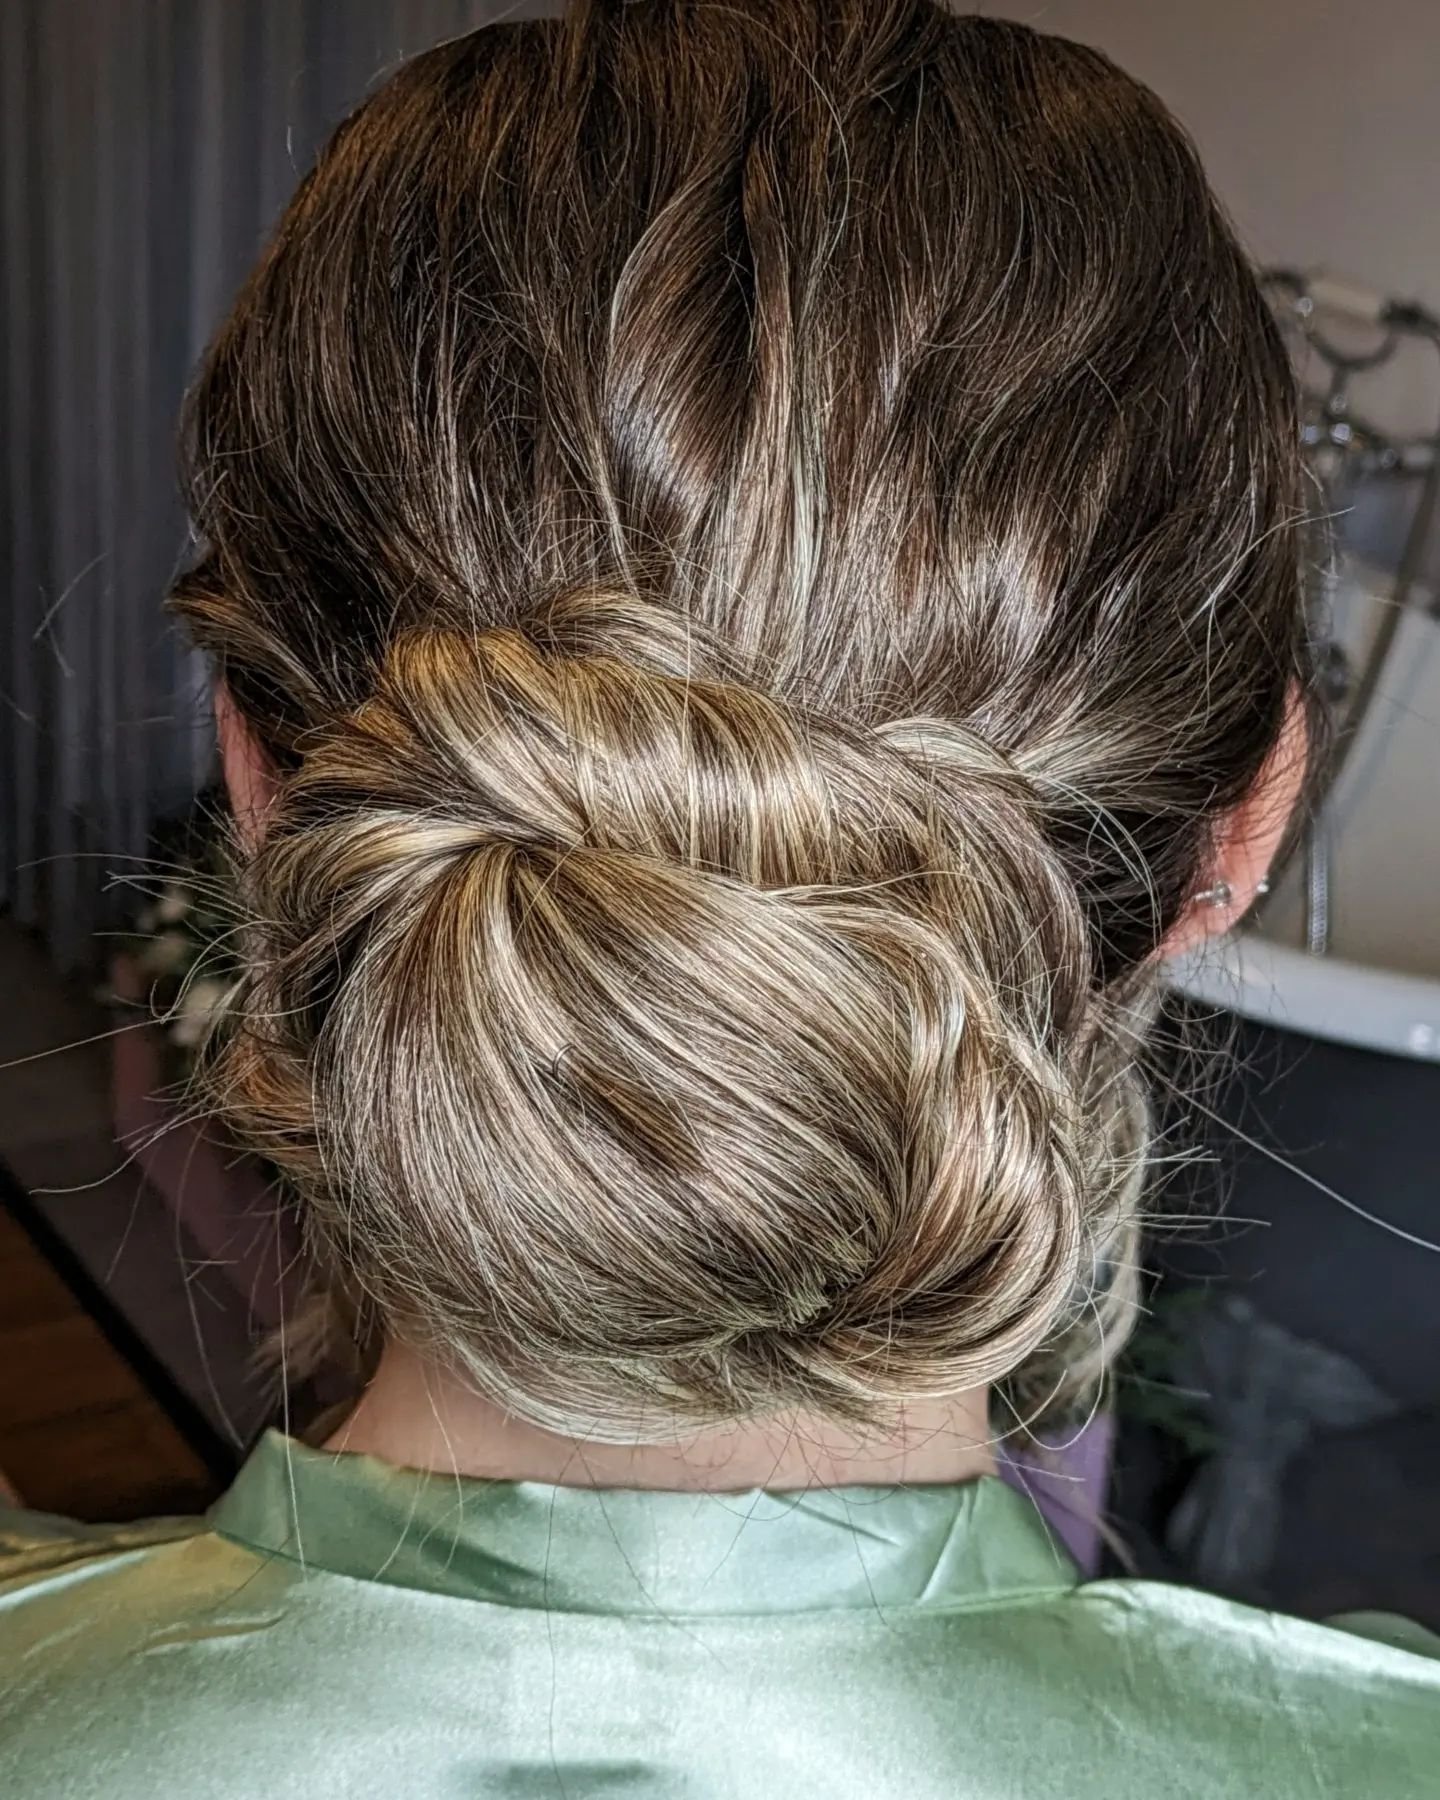 I realised I haven't shared hairstyles in a while! 

Here is a bridesmaid bun - my usual bit of texture for a more relaxed look. 

Planning on regular practises for more content when I get back from holiday - anyone fancy modelling? 

Assisting @oksa